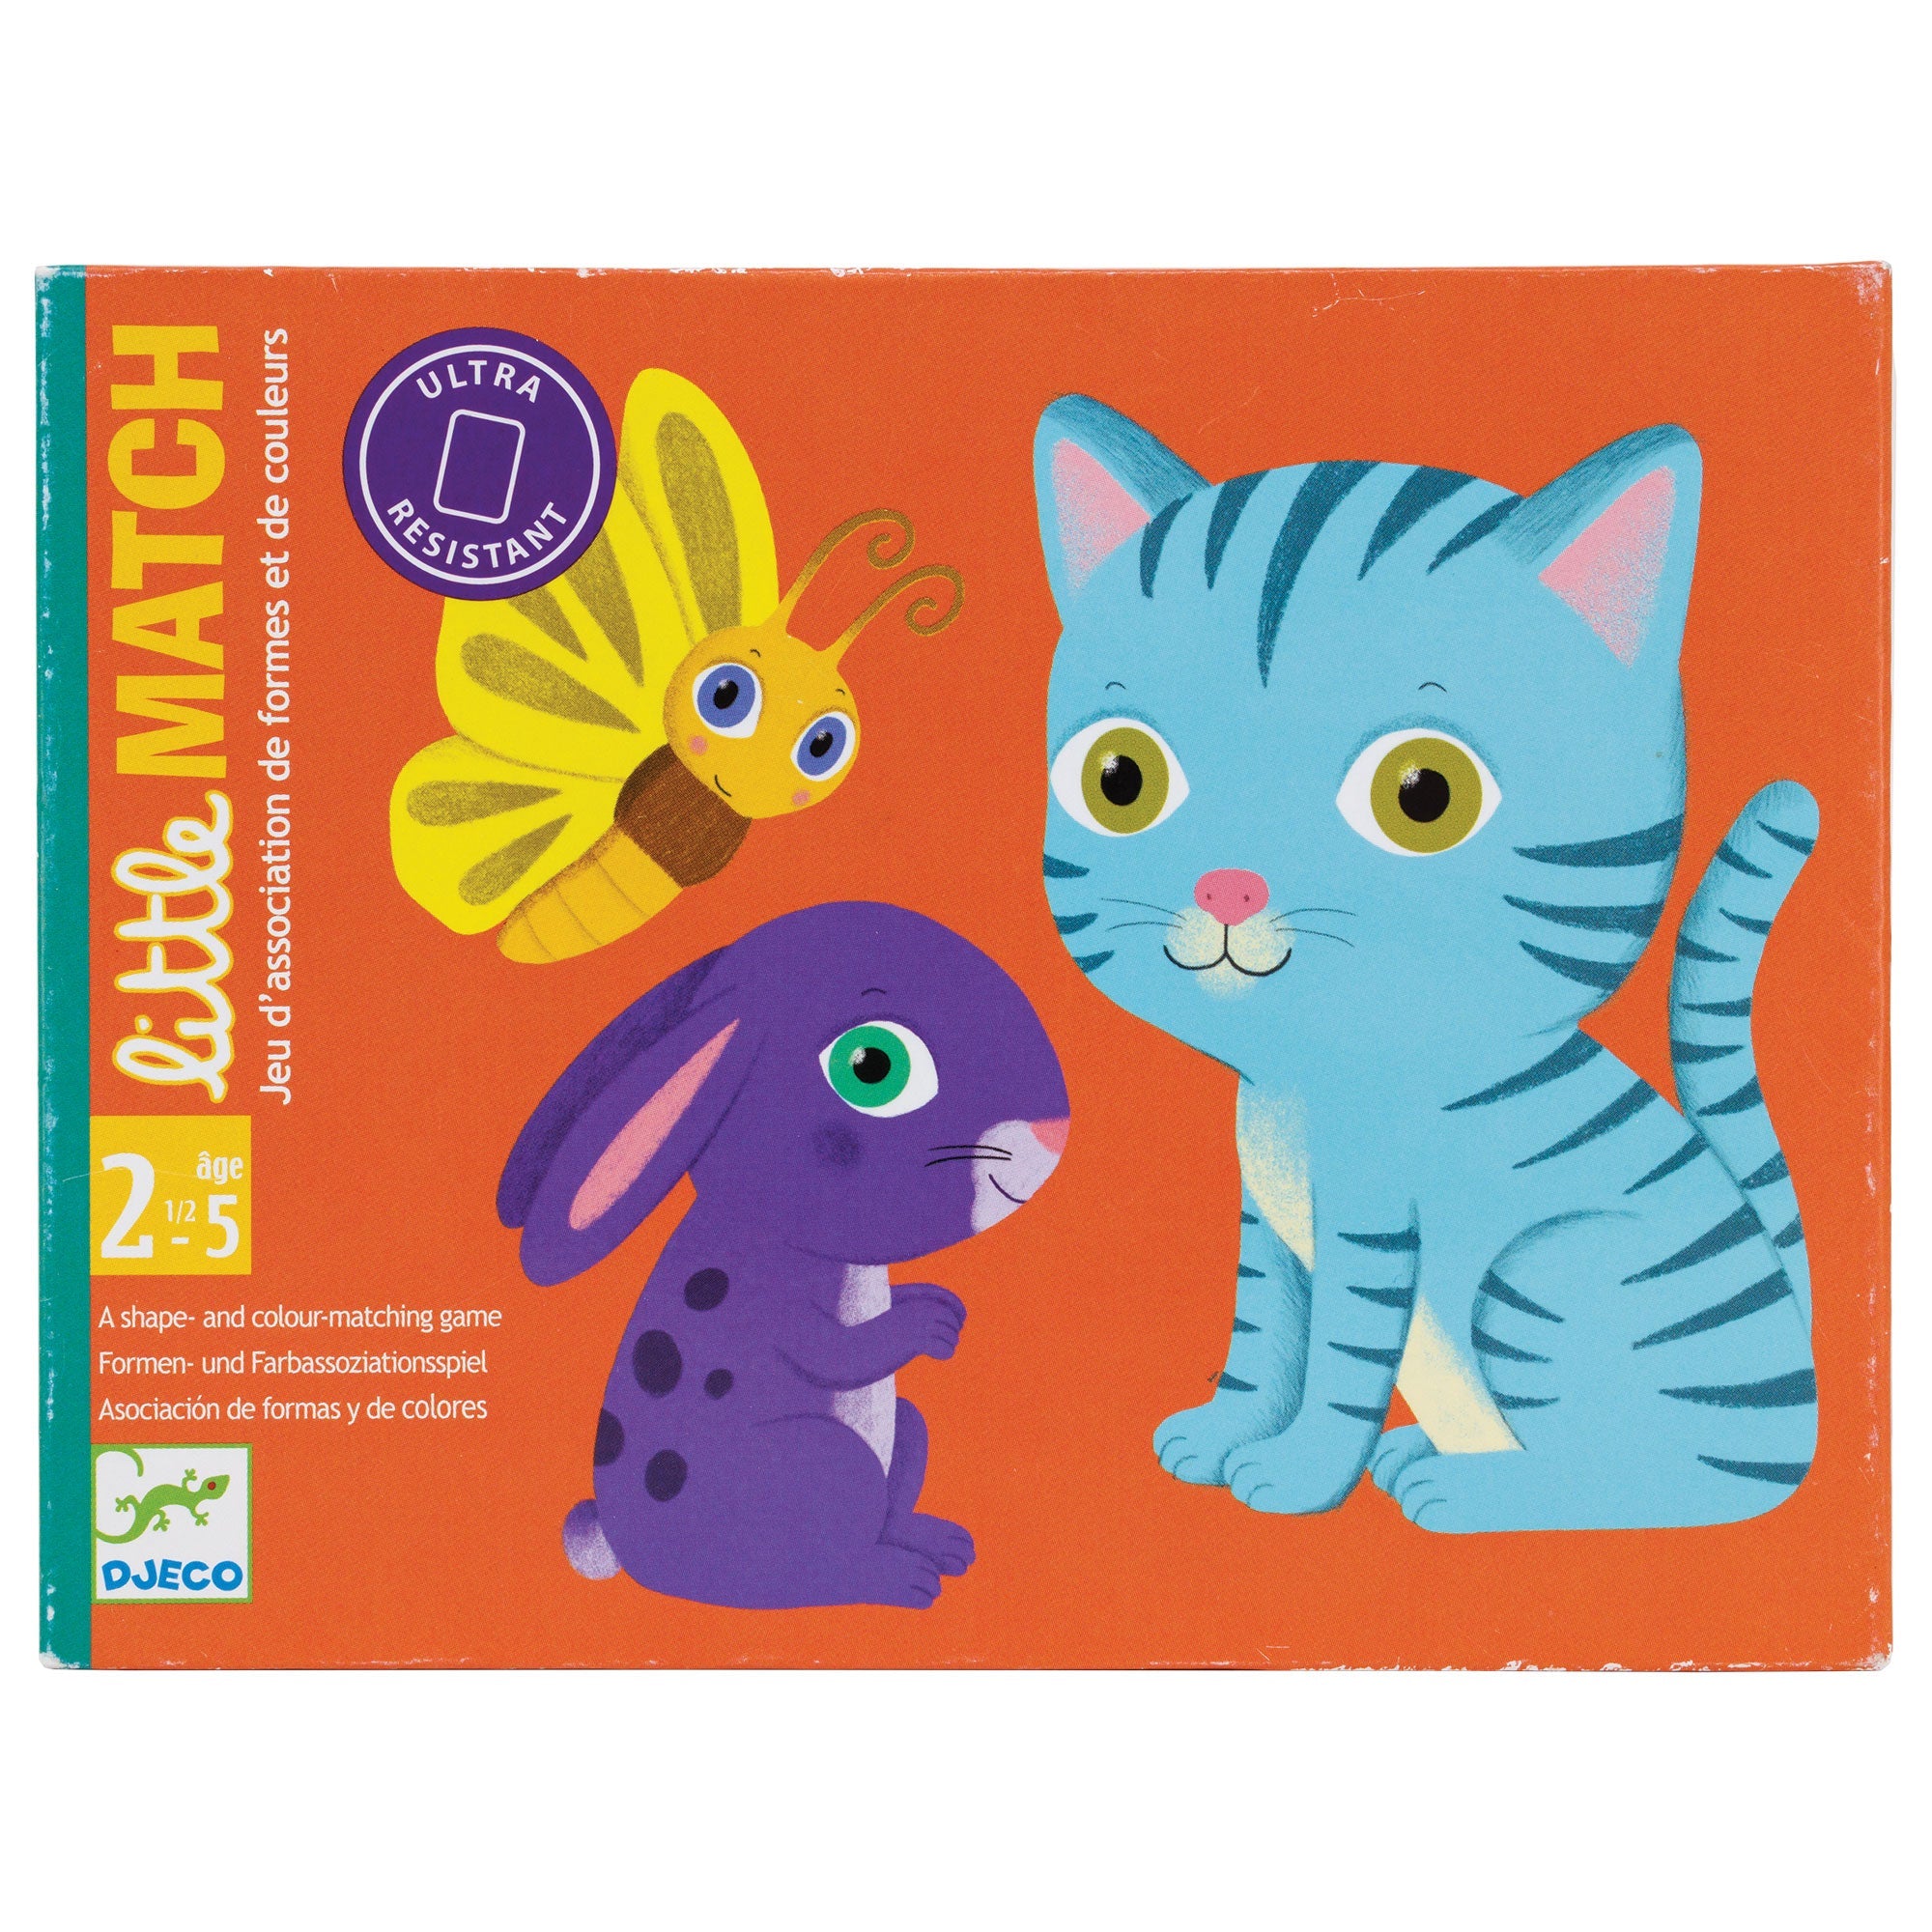 Djeco Little Match game box. The box is dark orange with a teal stripe on the left side. There are 3 animals in the middle; a yellow butterfly, blue cat, and purple bunny. They are all smiling and looking straight at you.